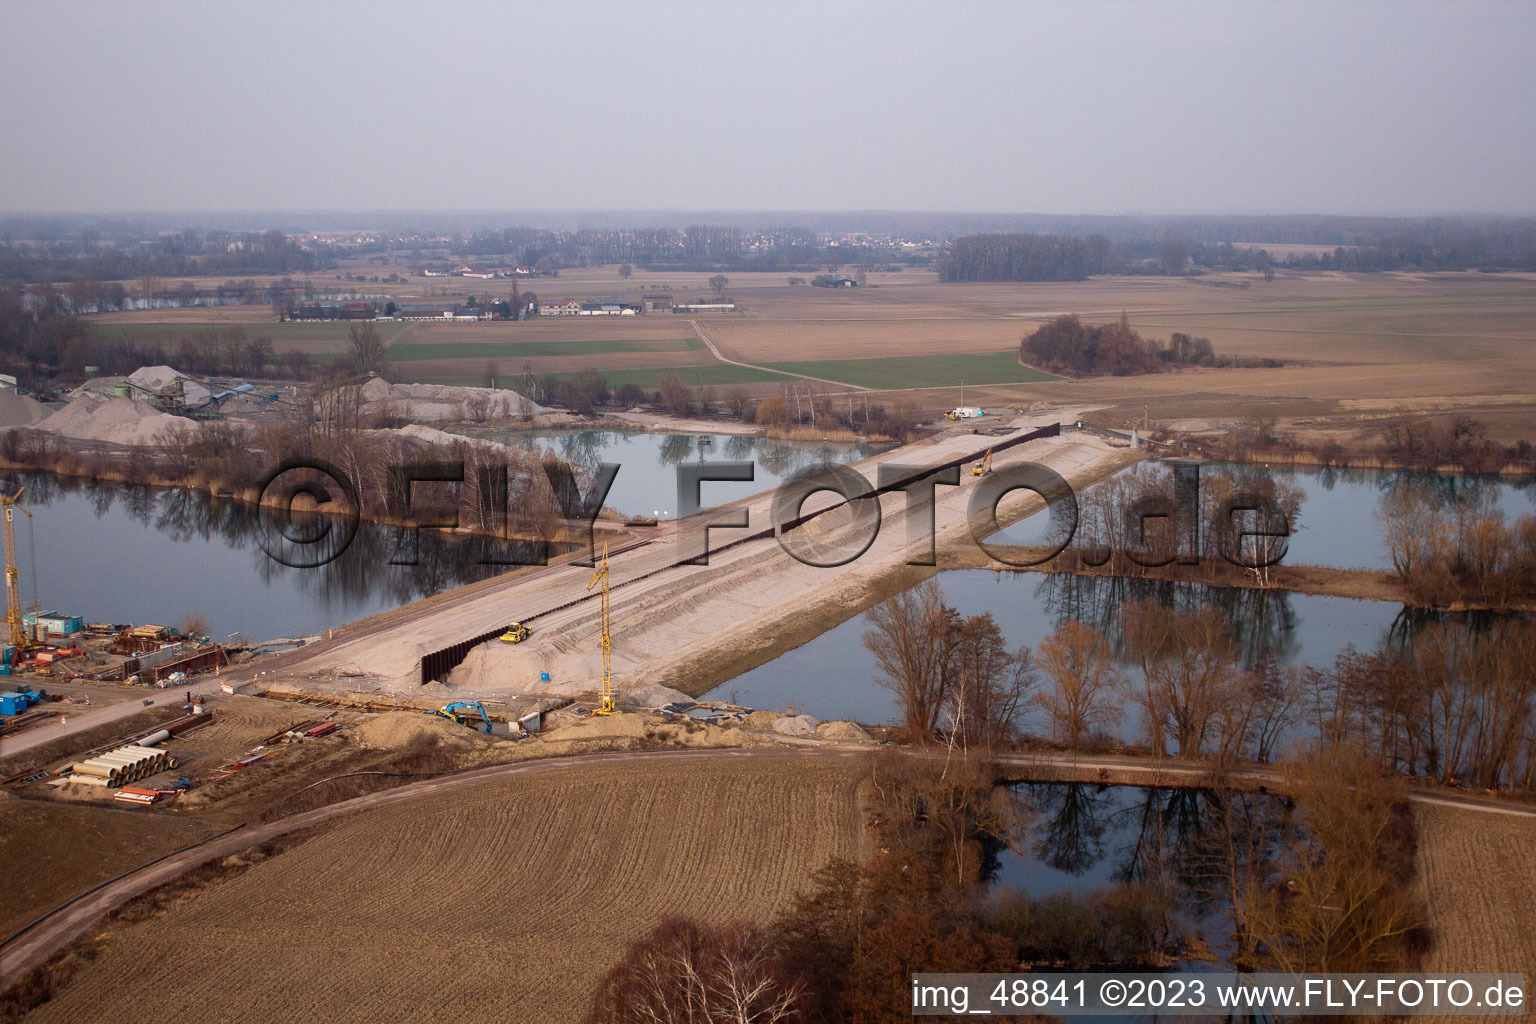 Aerial photograpy of Polders in Neupotz in the state Rhineland-Palatinate, Germany